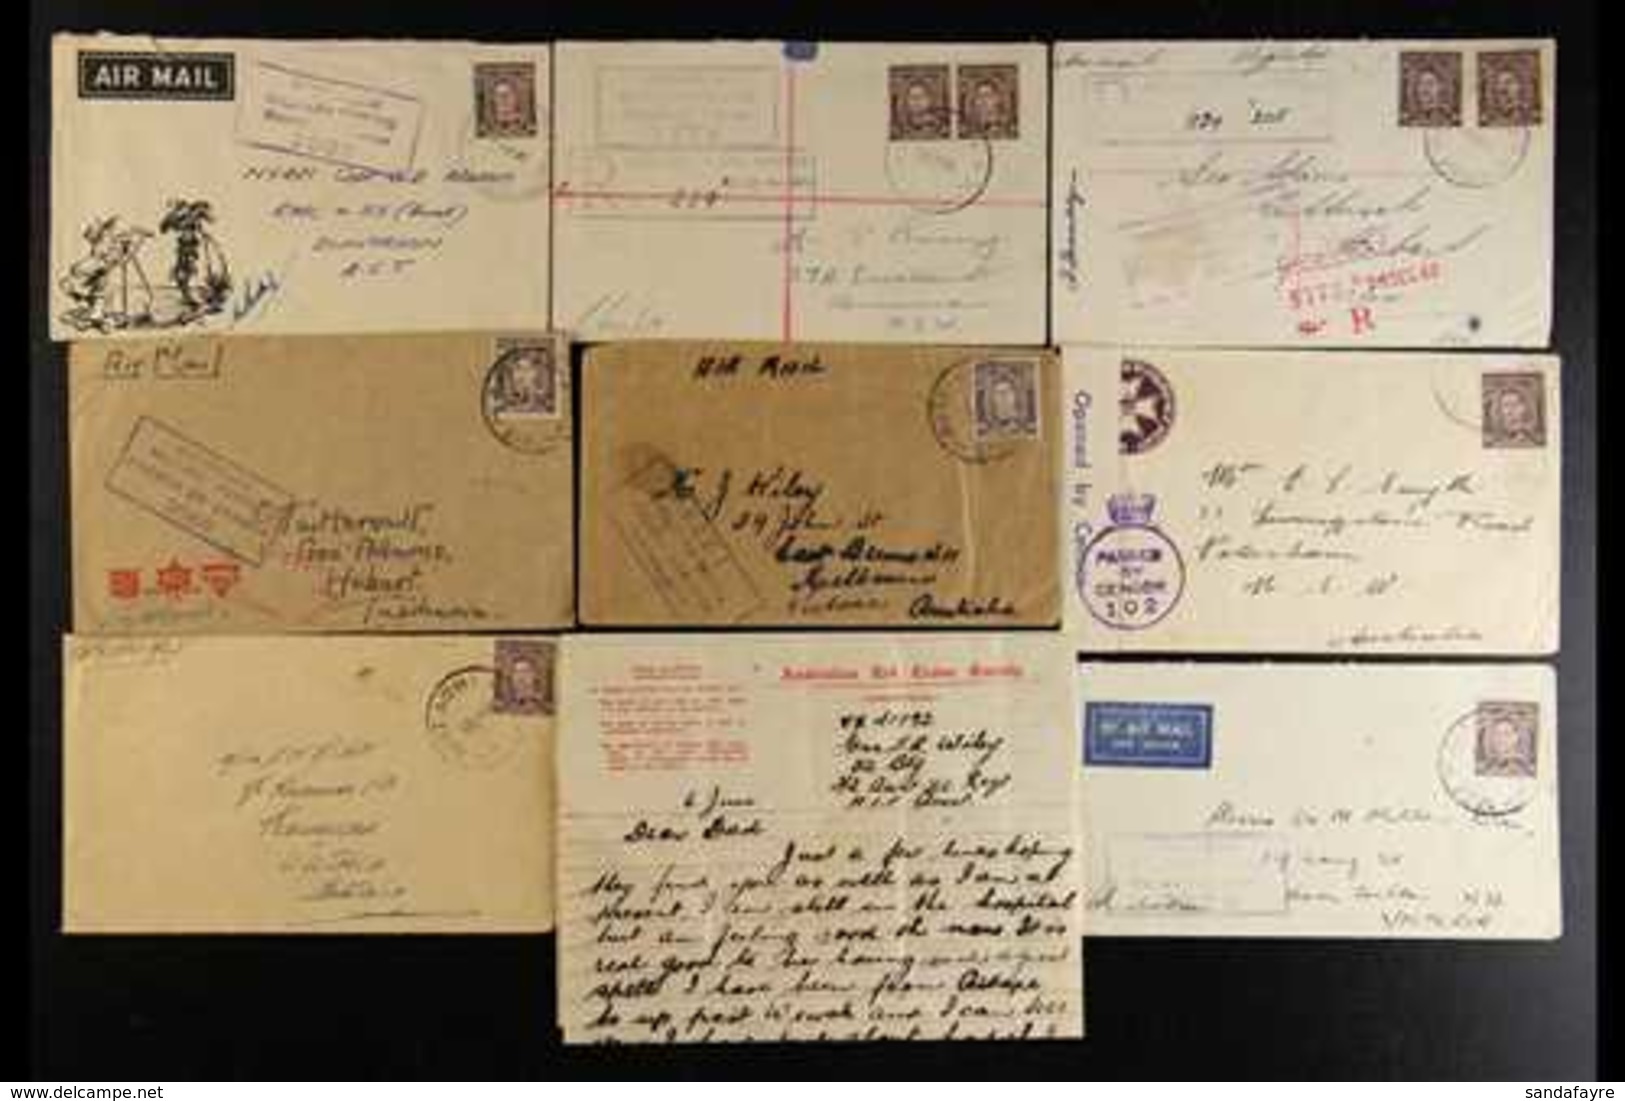 WORLD WAR II - AUSTRALIAN ARMY COVERS Fine Collection Of Covers To Australia, Bearing Australia KGVI Stamps Tied By Clea - Papua New Guinea